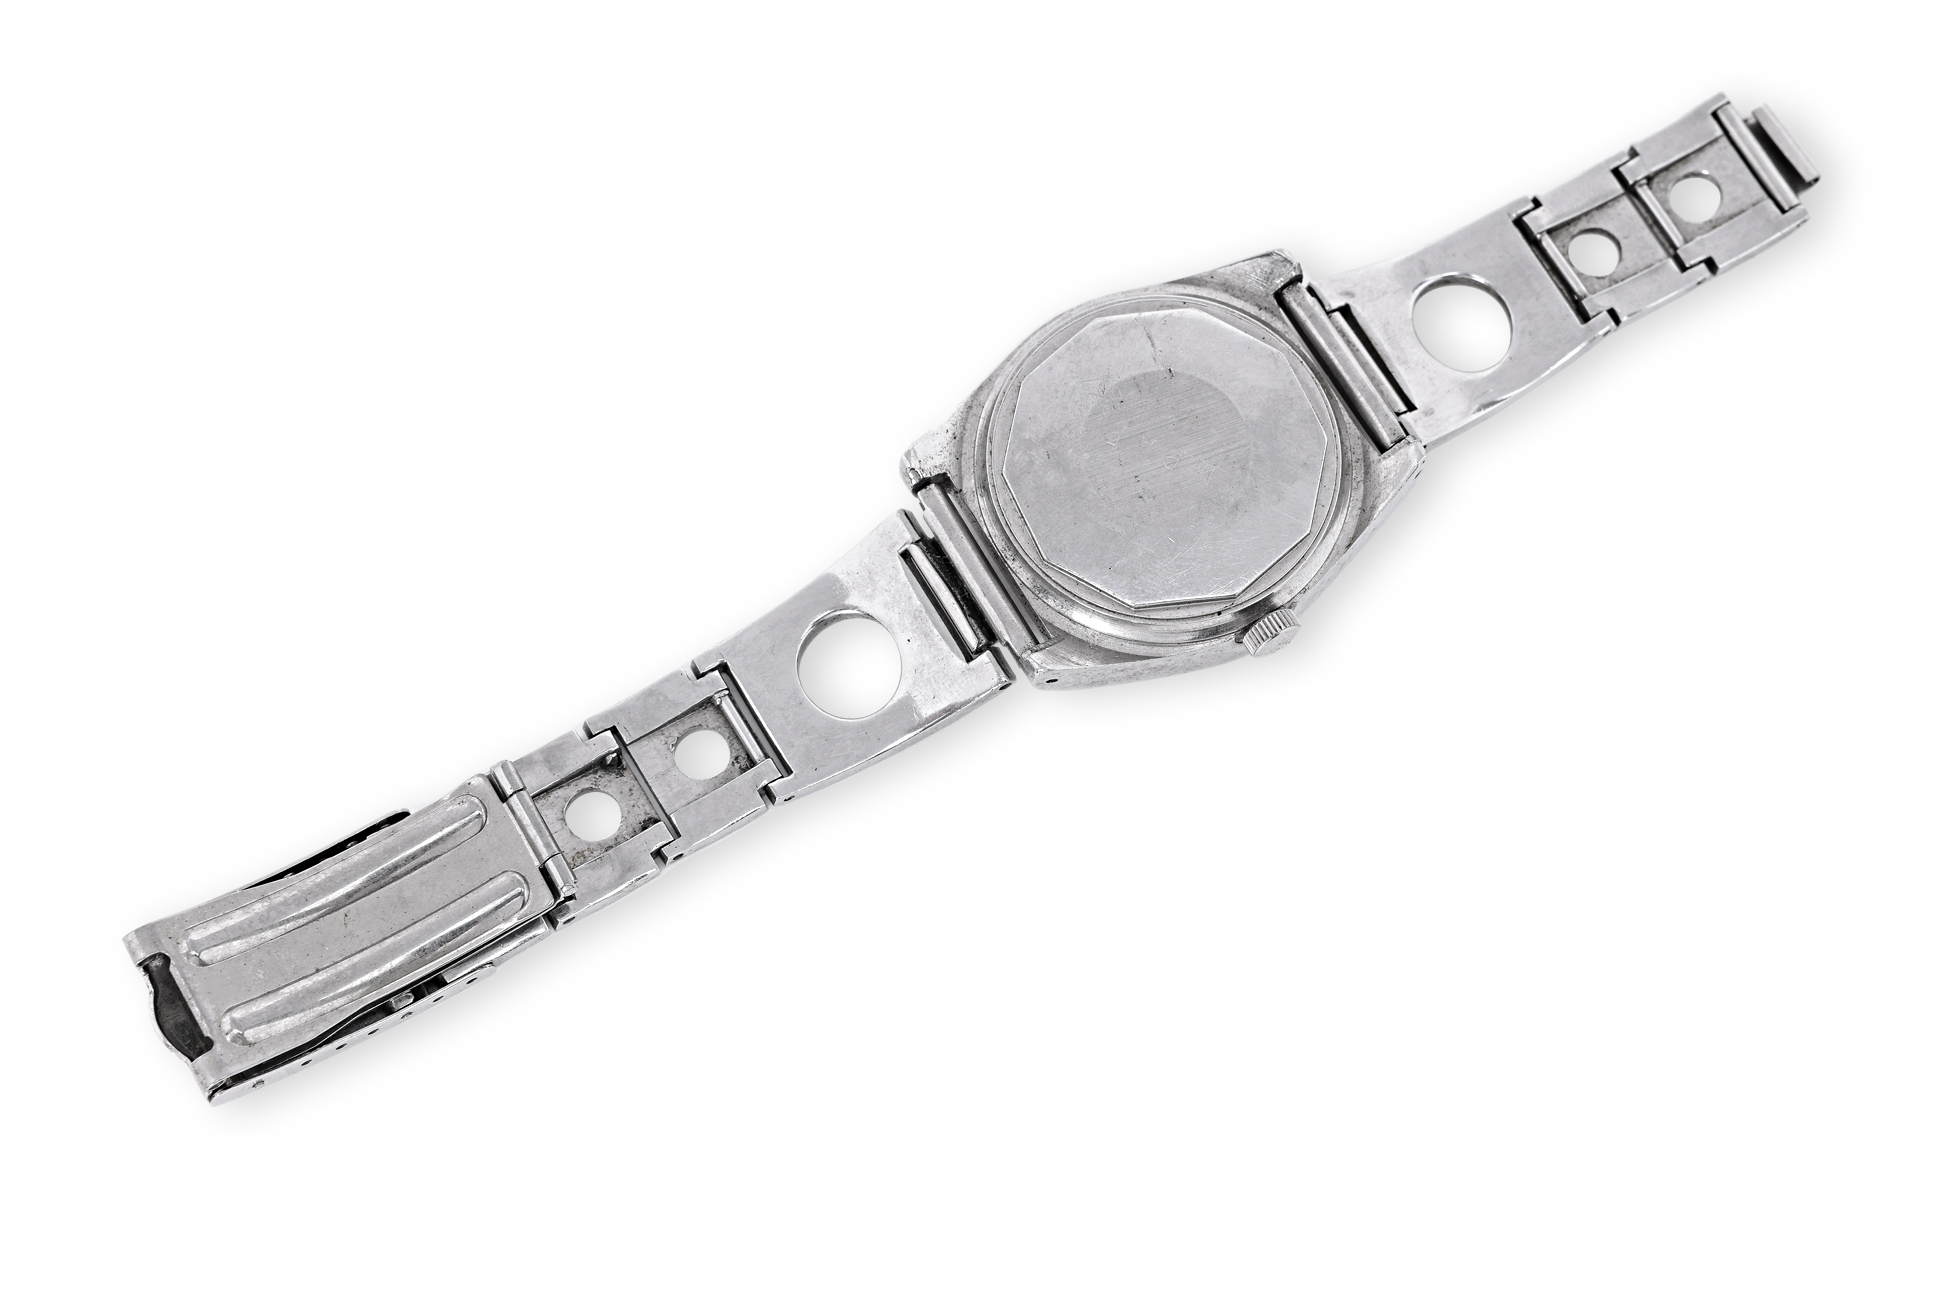 A TISSOT PR 516 GL STAINLESS STEEL AUTOMATIC BRACELET WATCH - Image 2 of 4